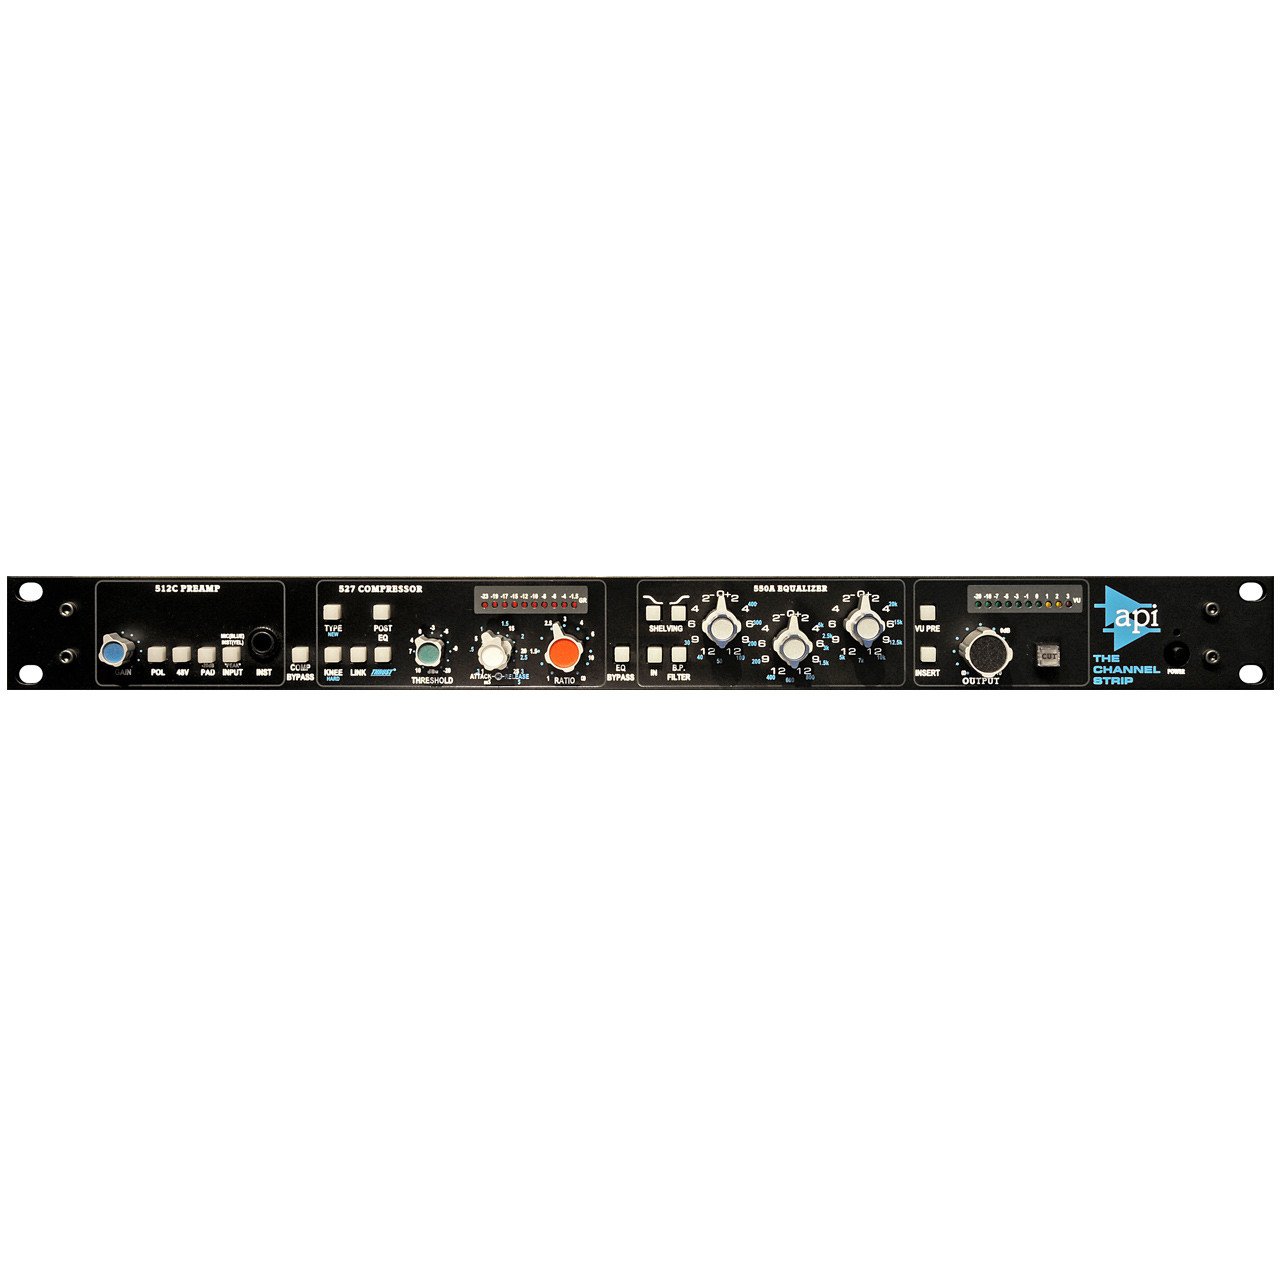 Preamps/Channel Strips - API: The Channel Strip